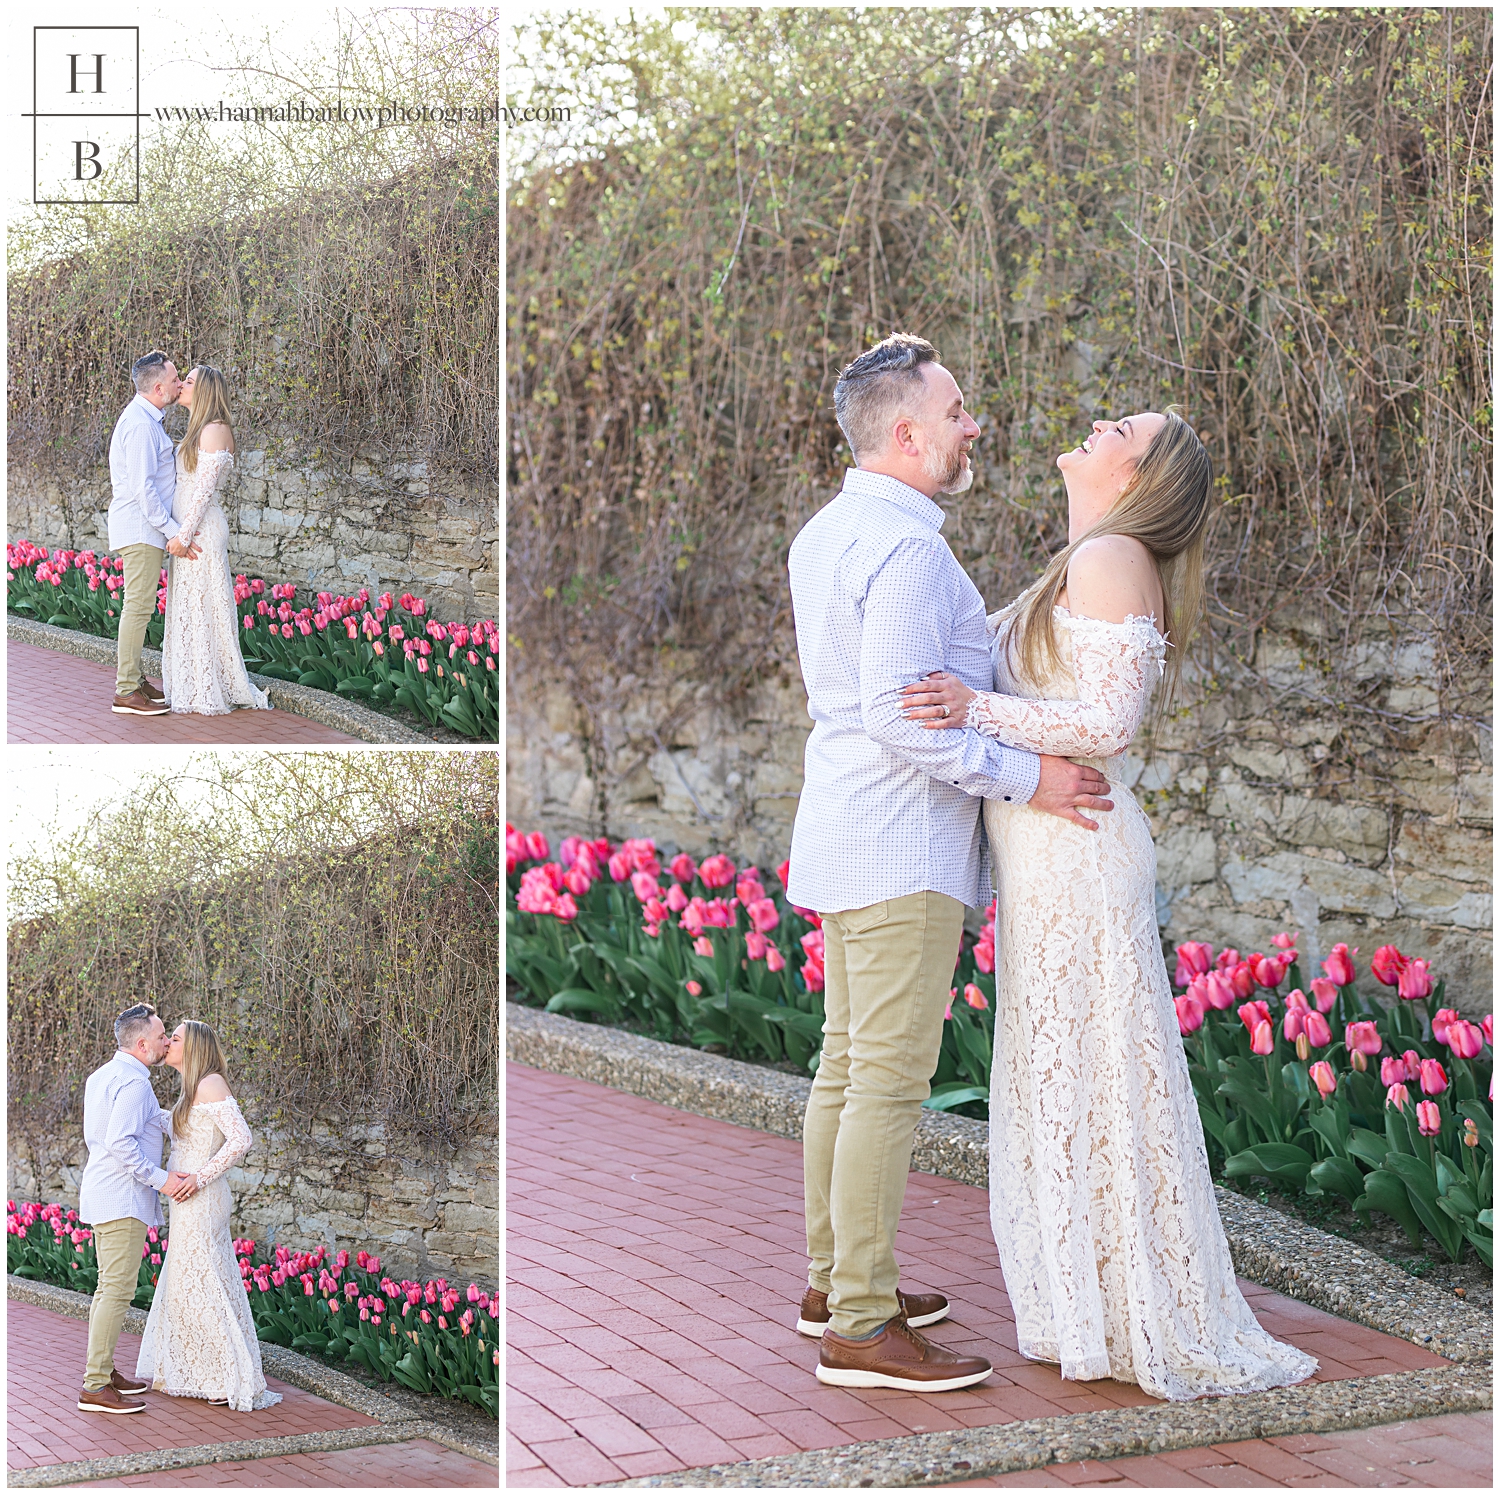 Couple dances and laughs by pink tulip flower bed.